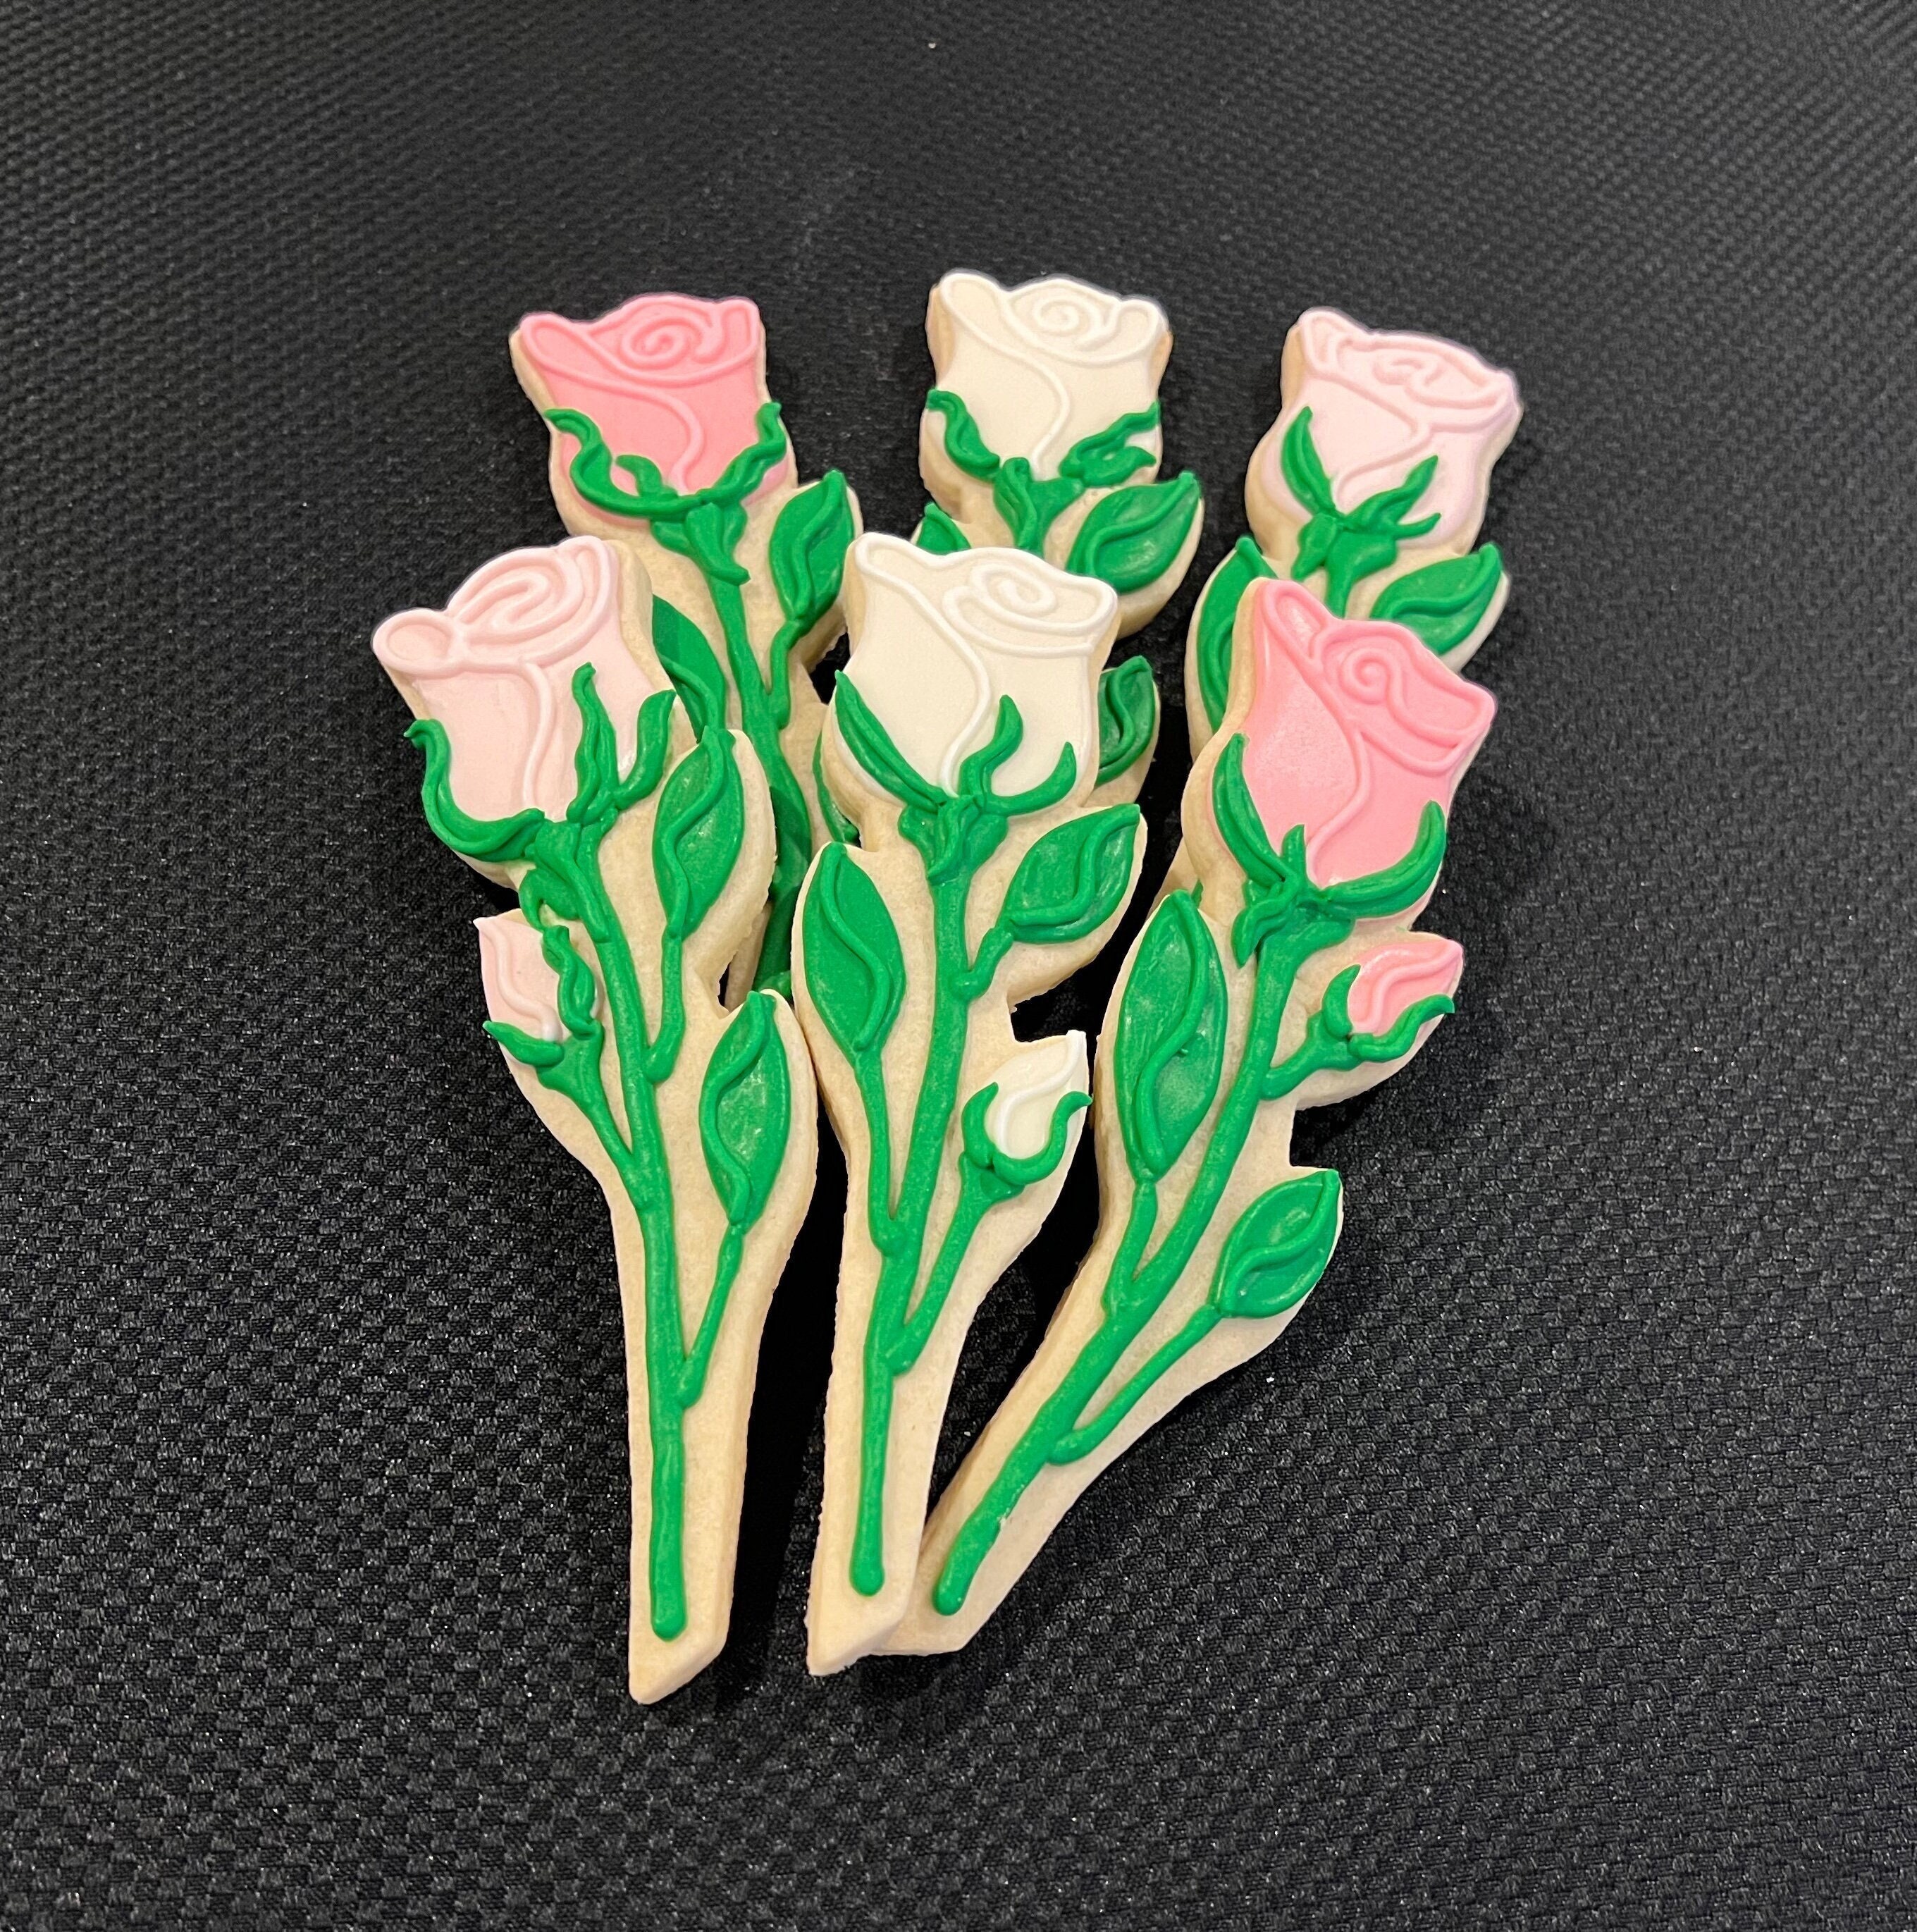 Long Flower Stem Cookie Cutter, Fondant and Playdoh Cutters Too 